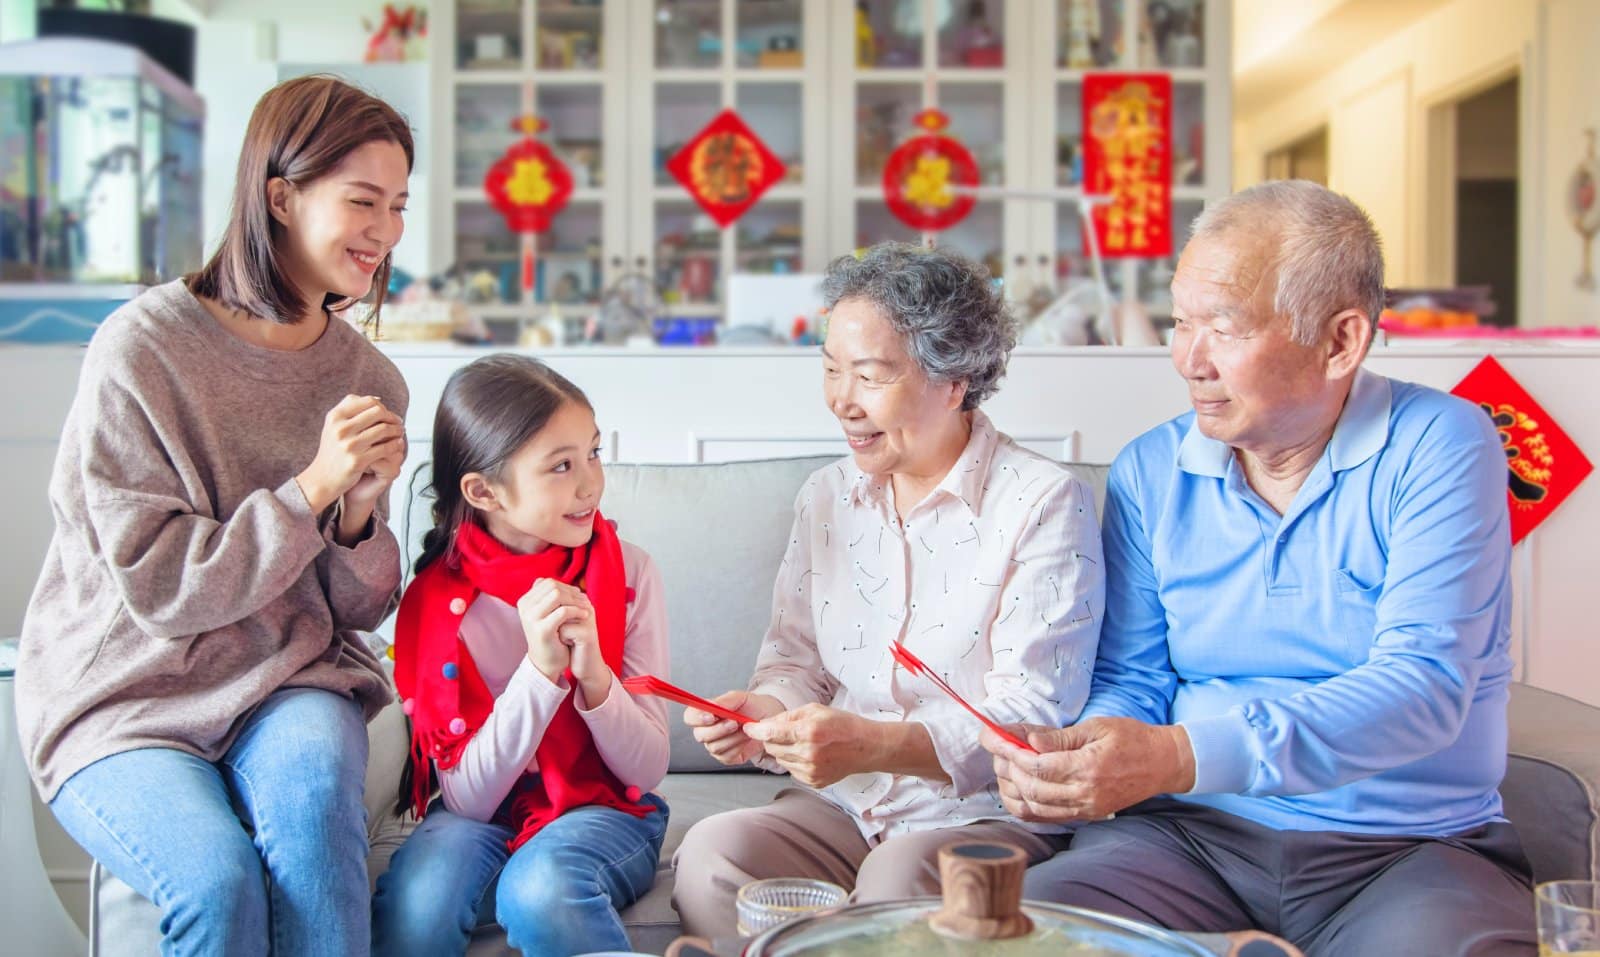 Image Credit: Shutterstock / Tom Wang <p><span>Explain a family or personal tradition that is meaningful to you and how it began.</span></p>